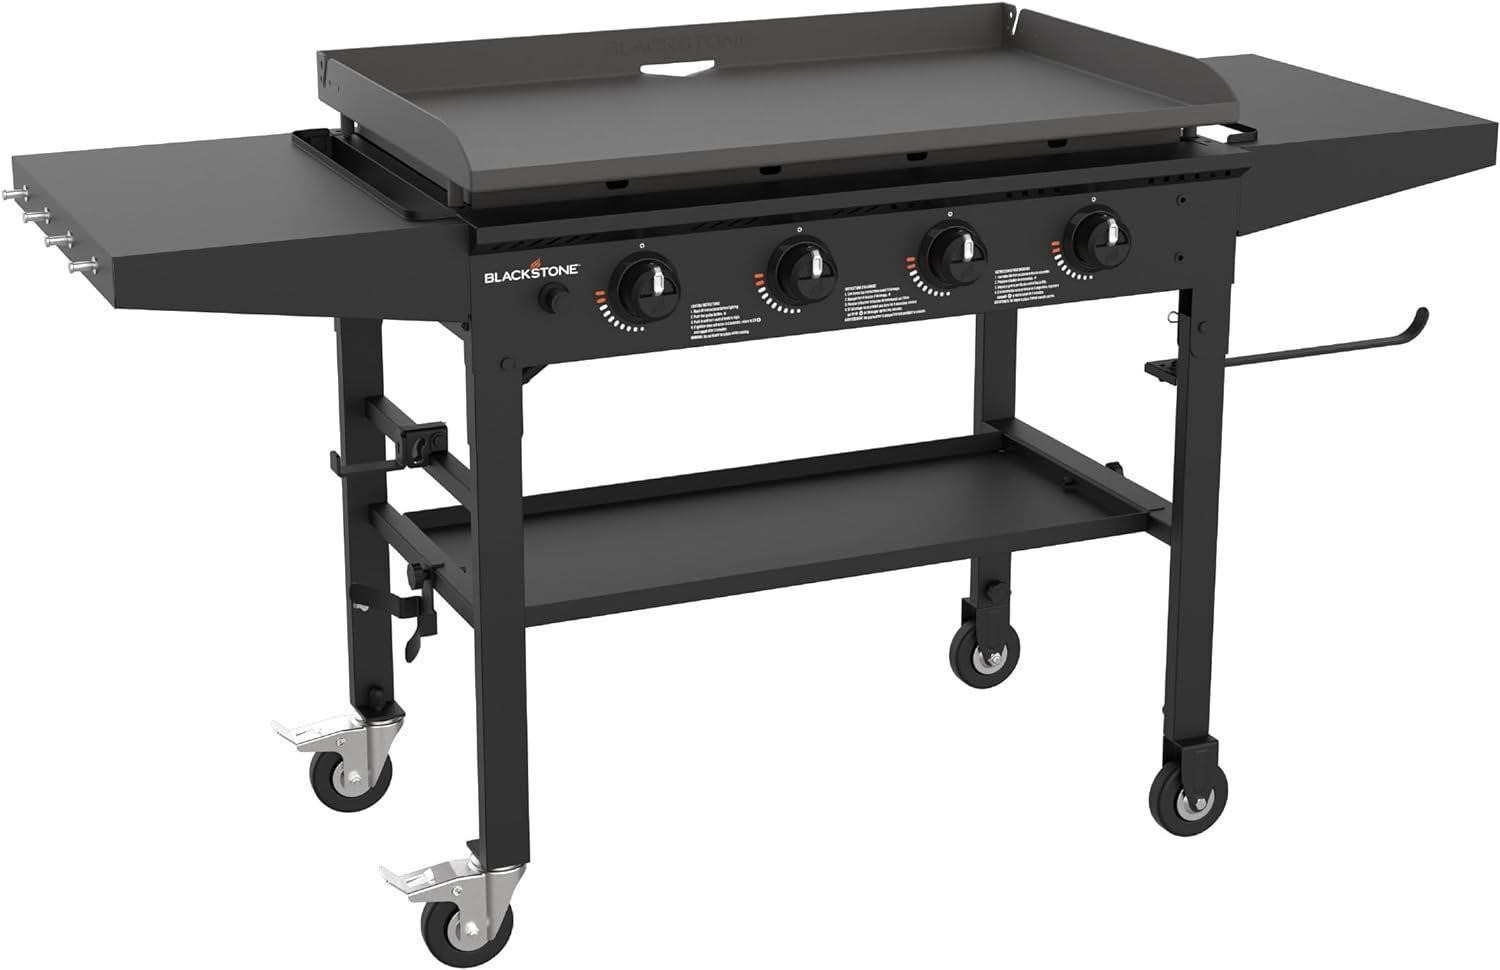 36" Blackstone Gas Griddle Cooking Station